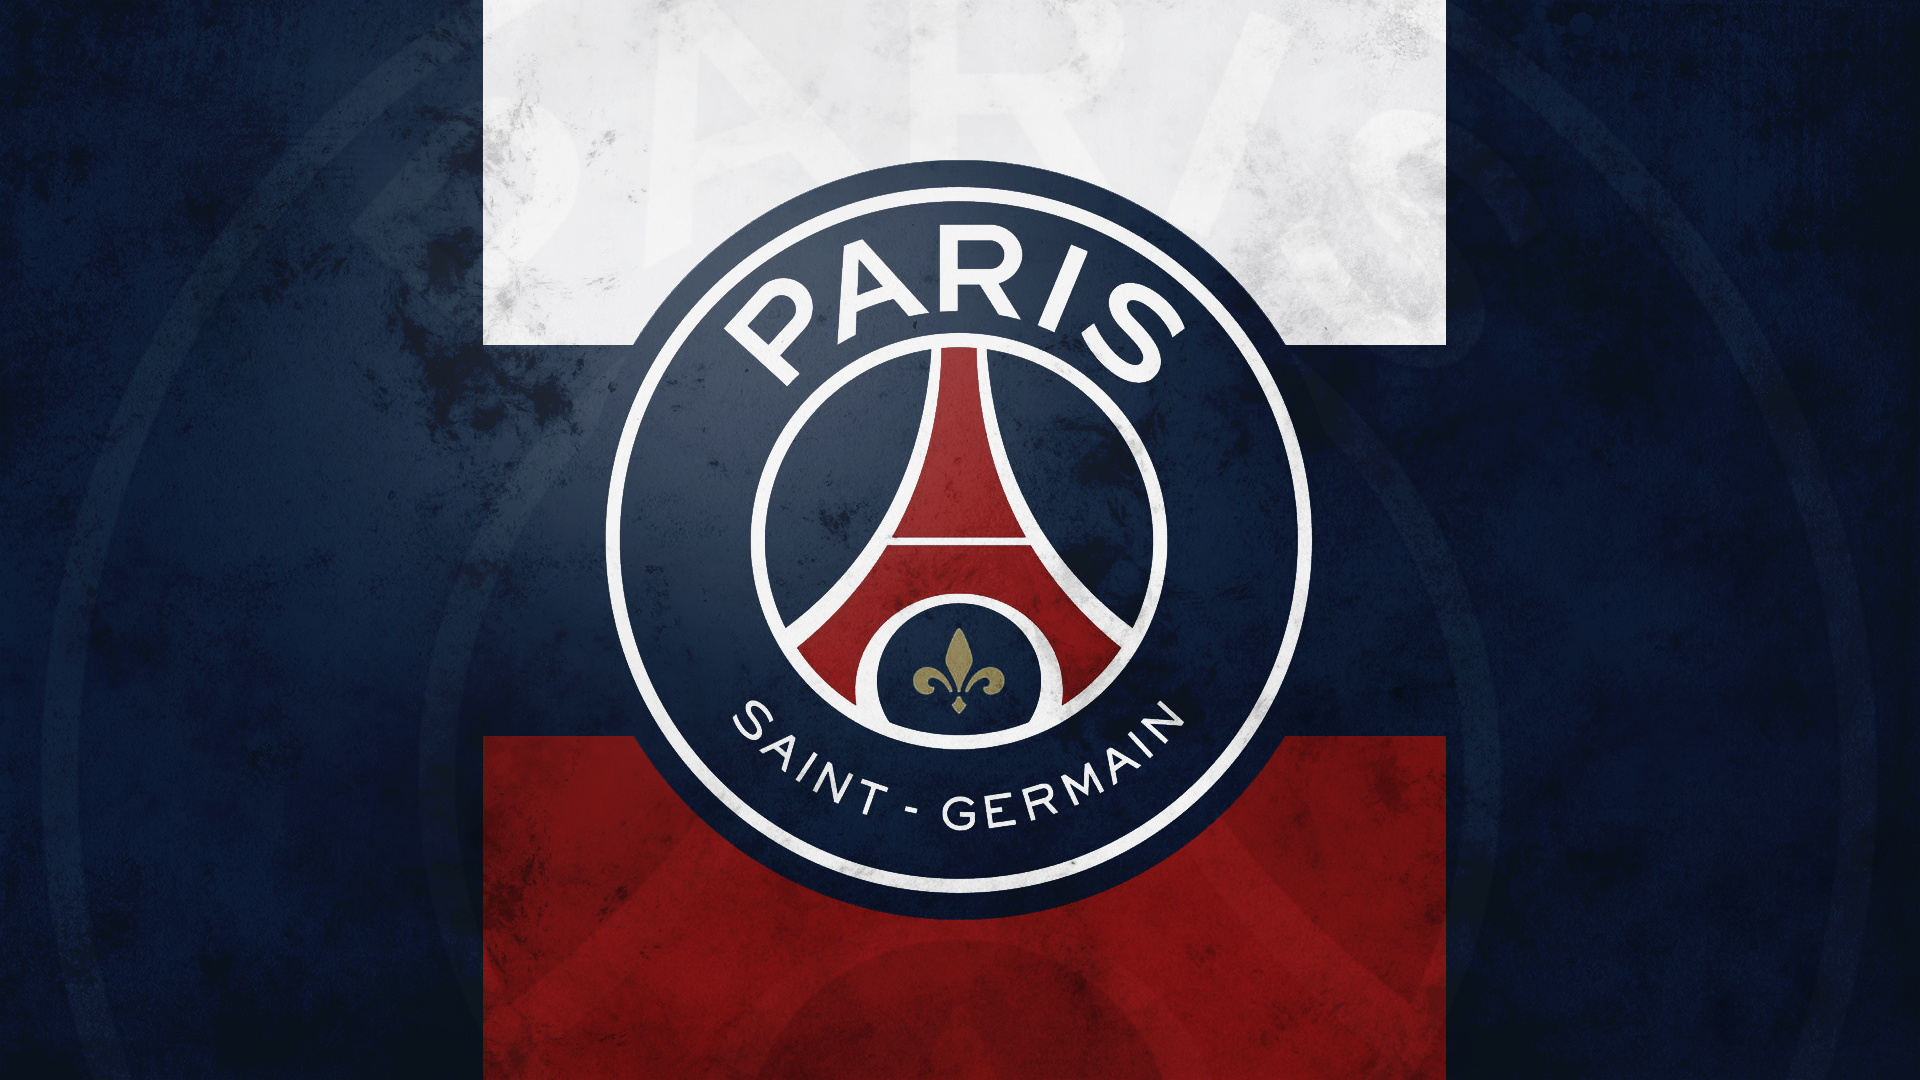 Paris Saint-Germain: Most famous for their domestic success since 2011, when they were taken over by Tamim bin Hamad Al Thani, ruler of Qatar. 1920x1080 Full HD Background.